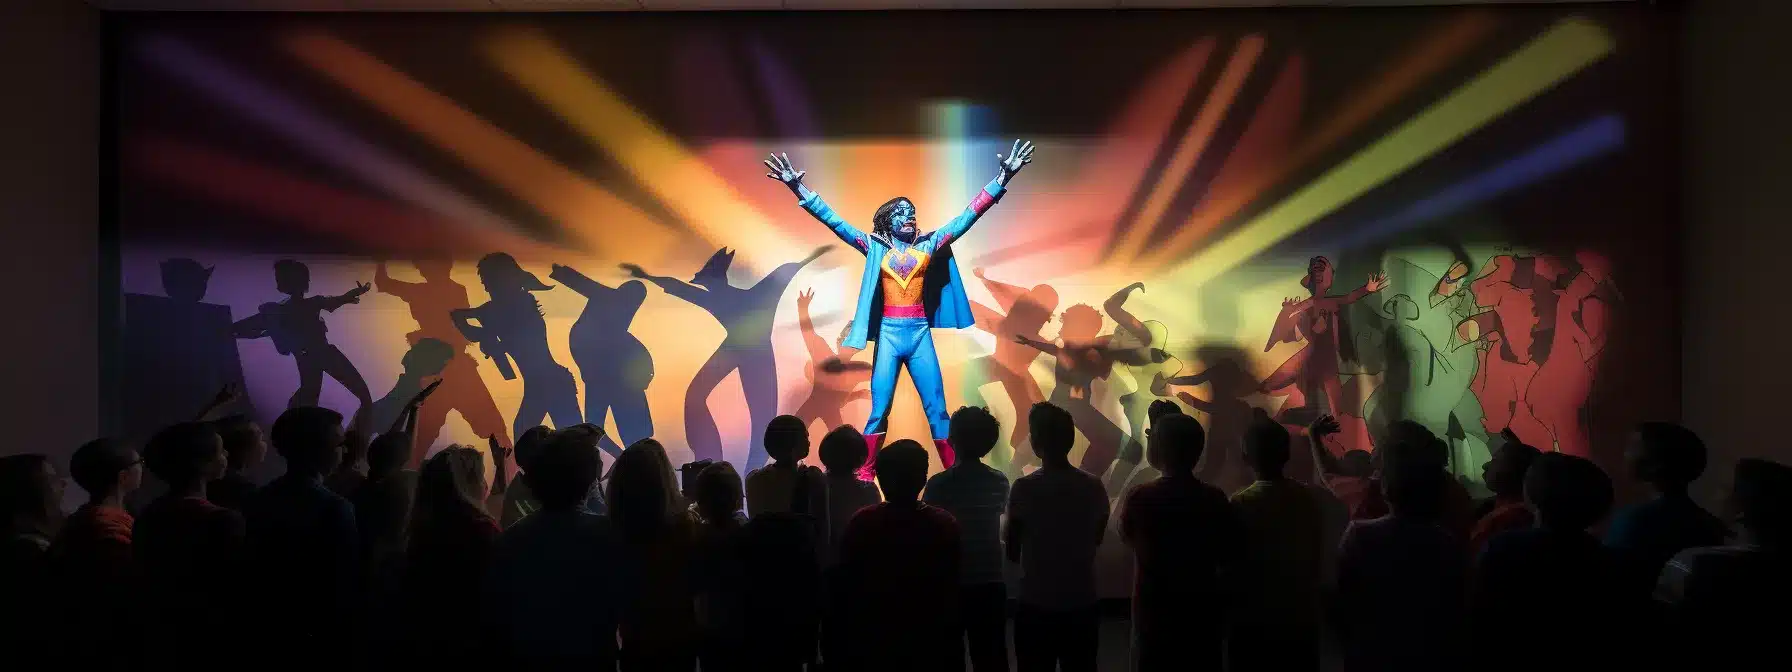 A Person Dressed As A Superhero And Surrounded By Colorful Shadow Puppets Projected On A Wall, Engaging With An Audience.